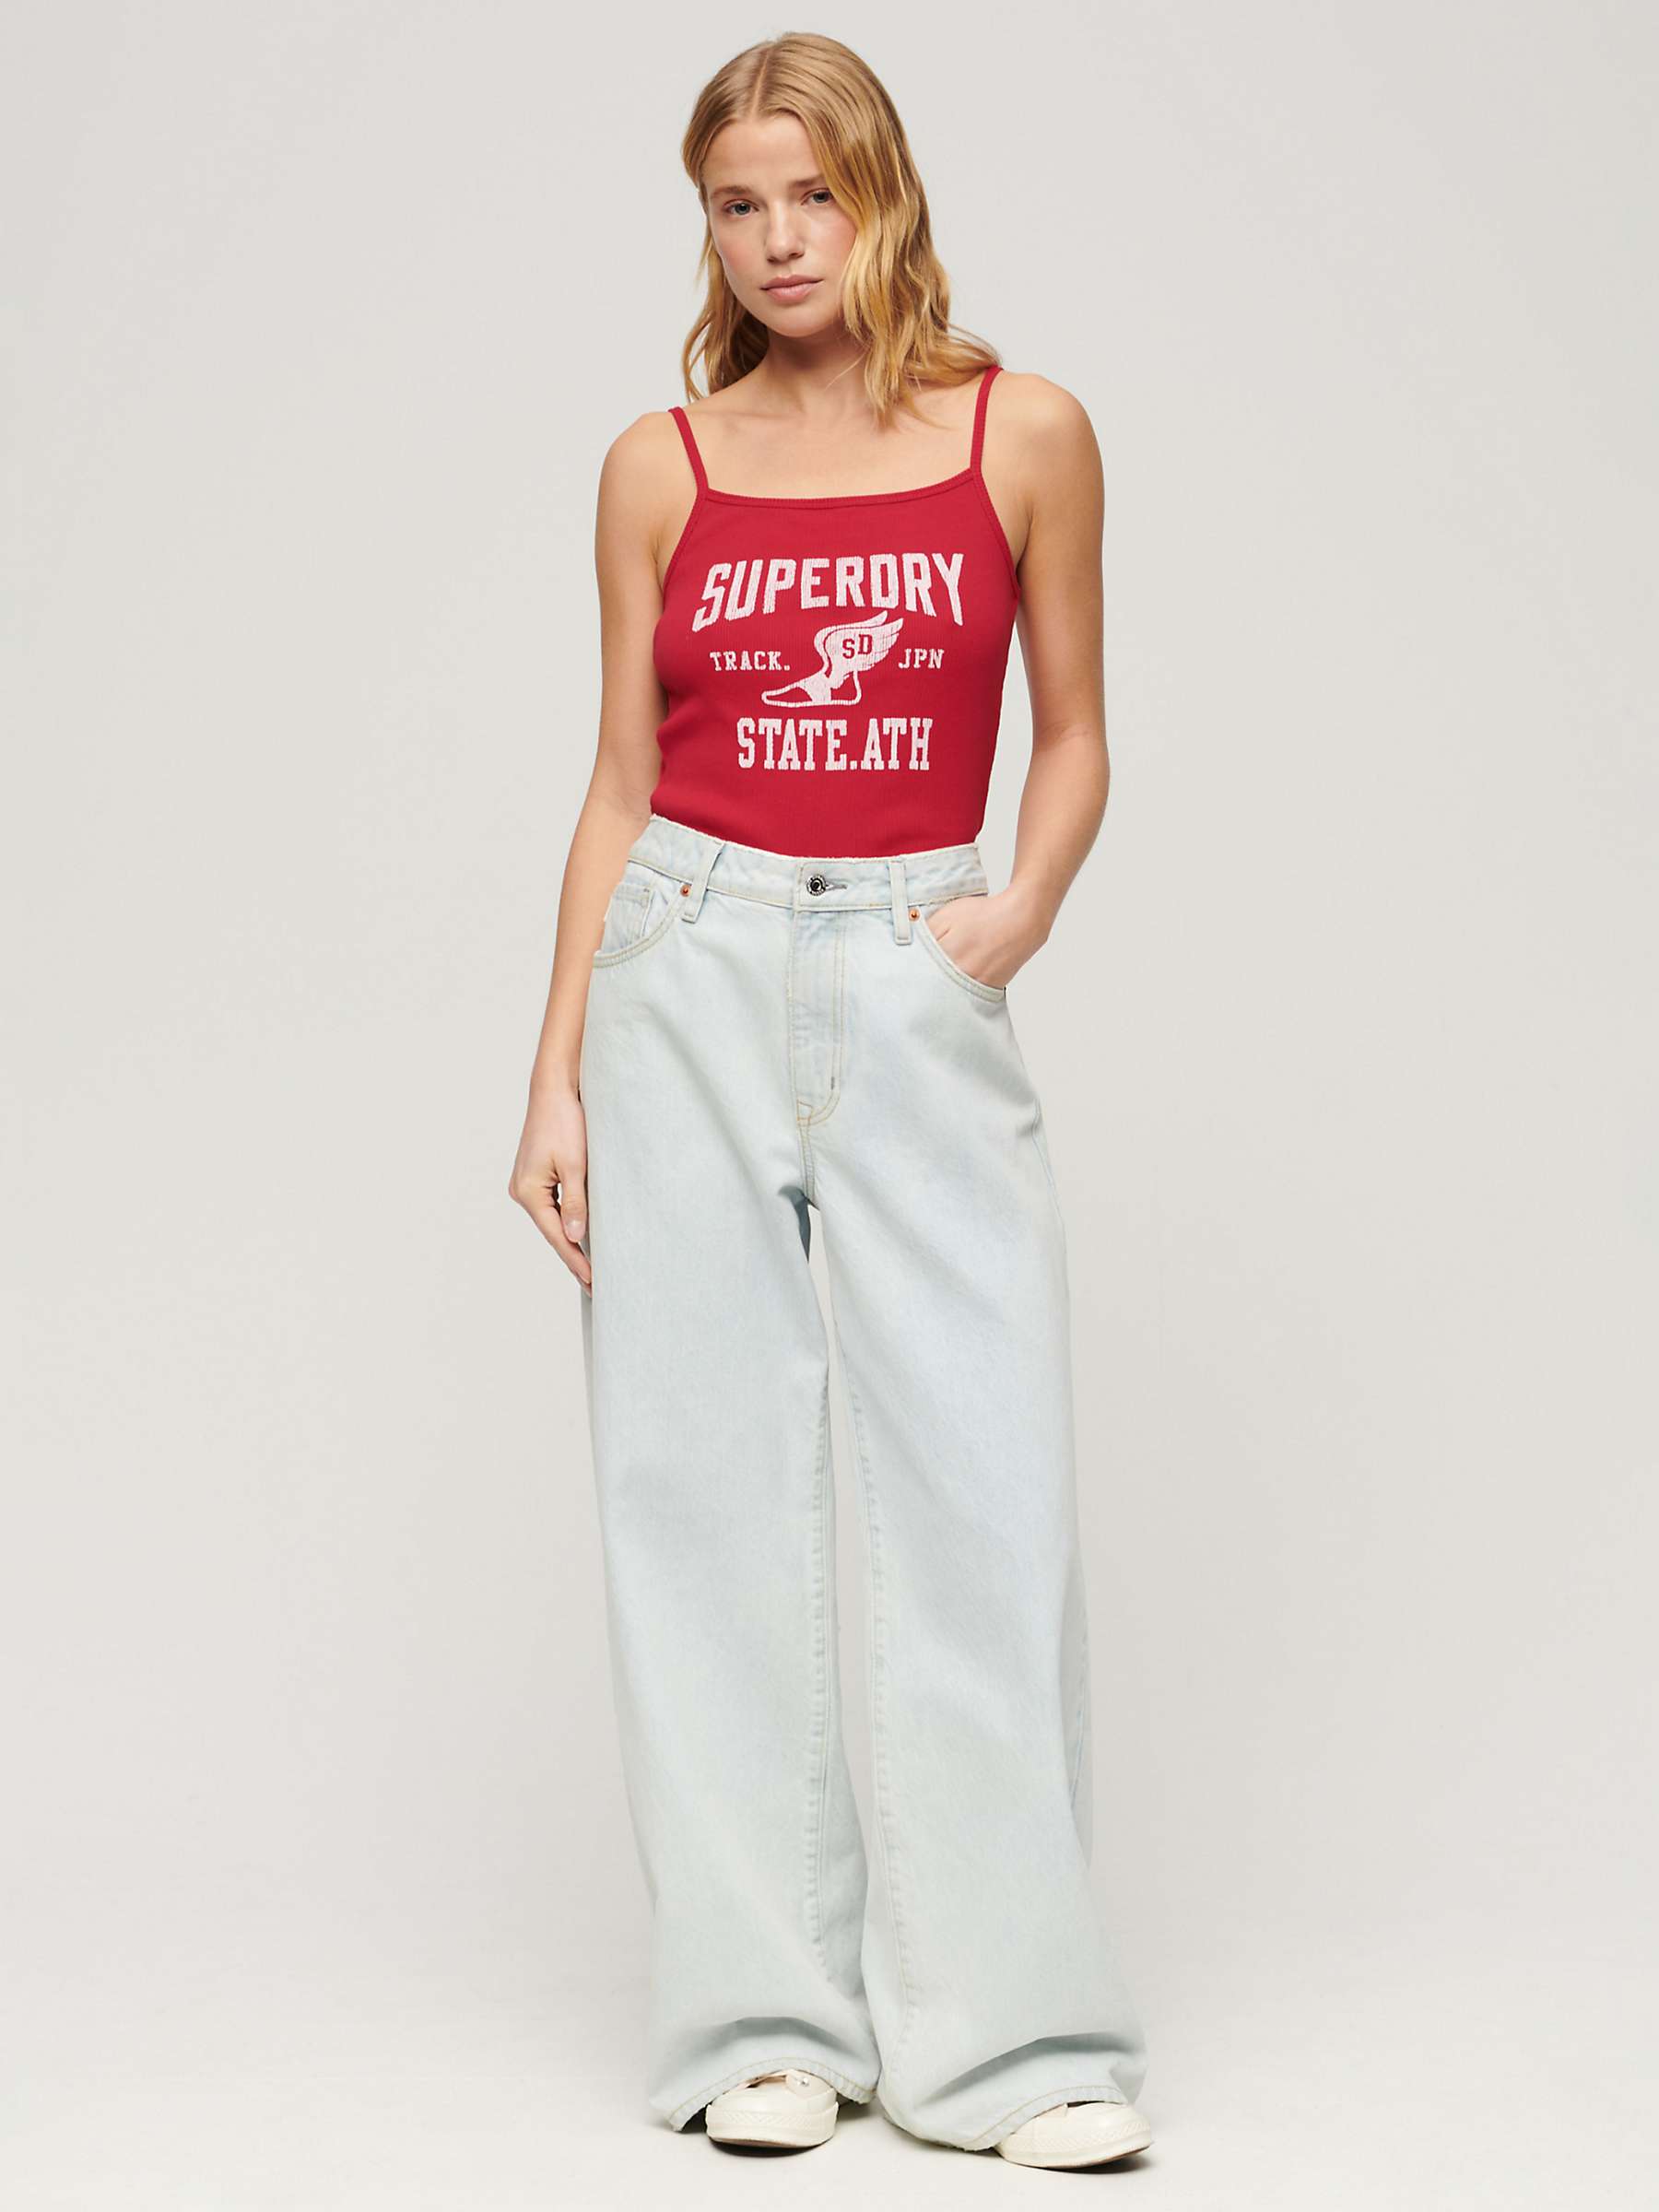 Buy Superdry Athletic College Graphic Rib Cami Top Online at johnlewis.com